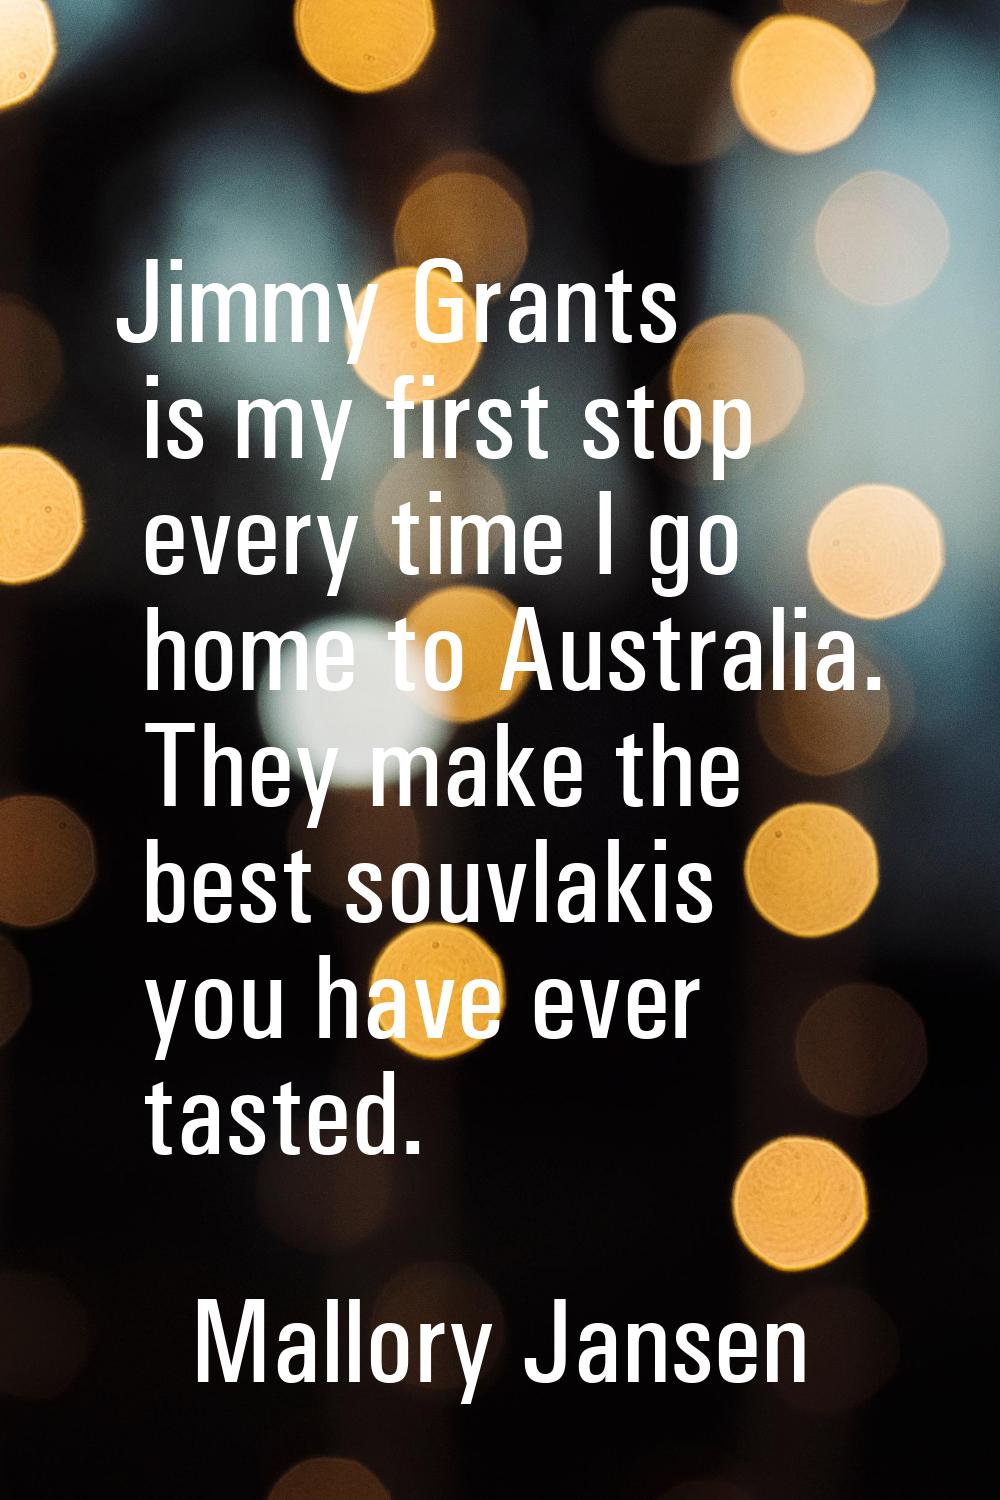 Jimmy Grants is my first stop every time I go home to Australia. They make the best souvlakis you h